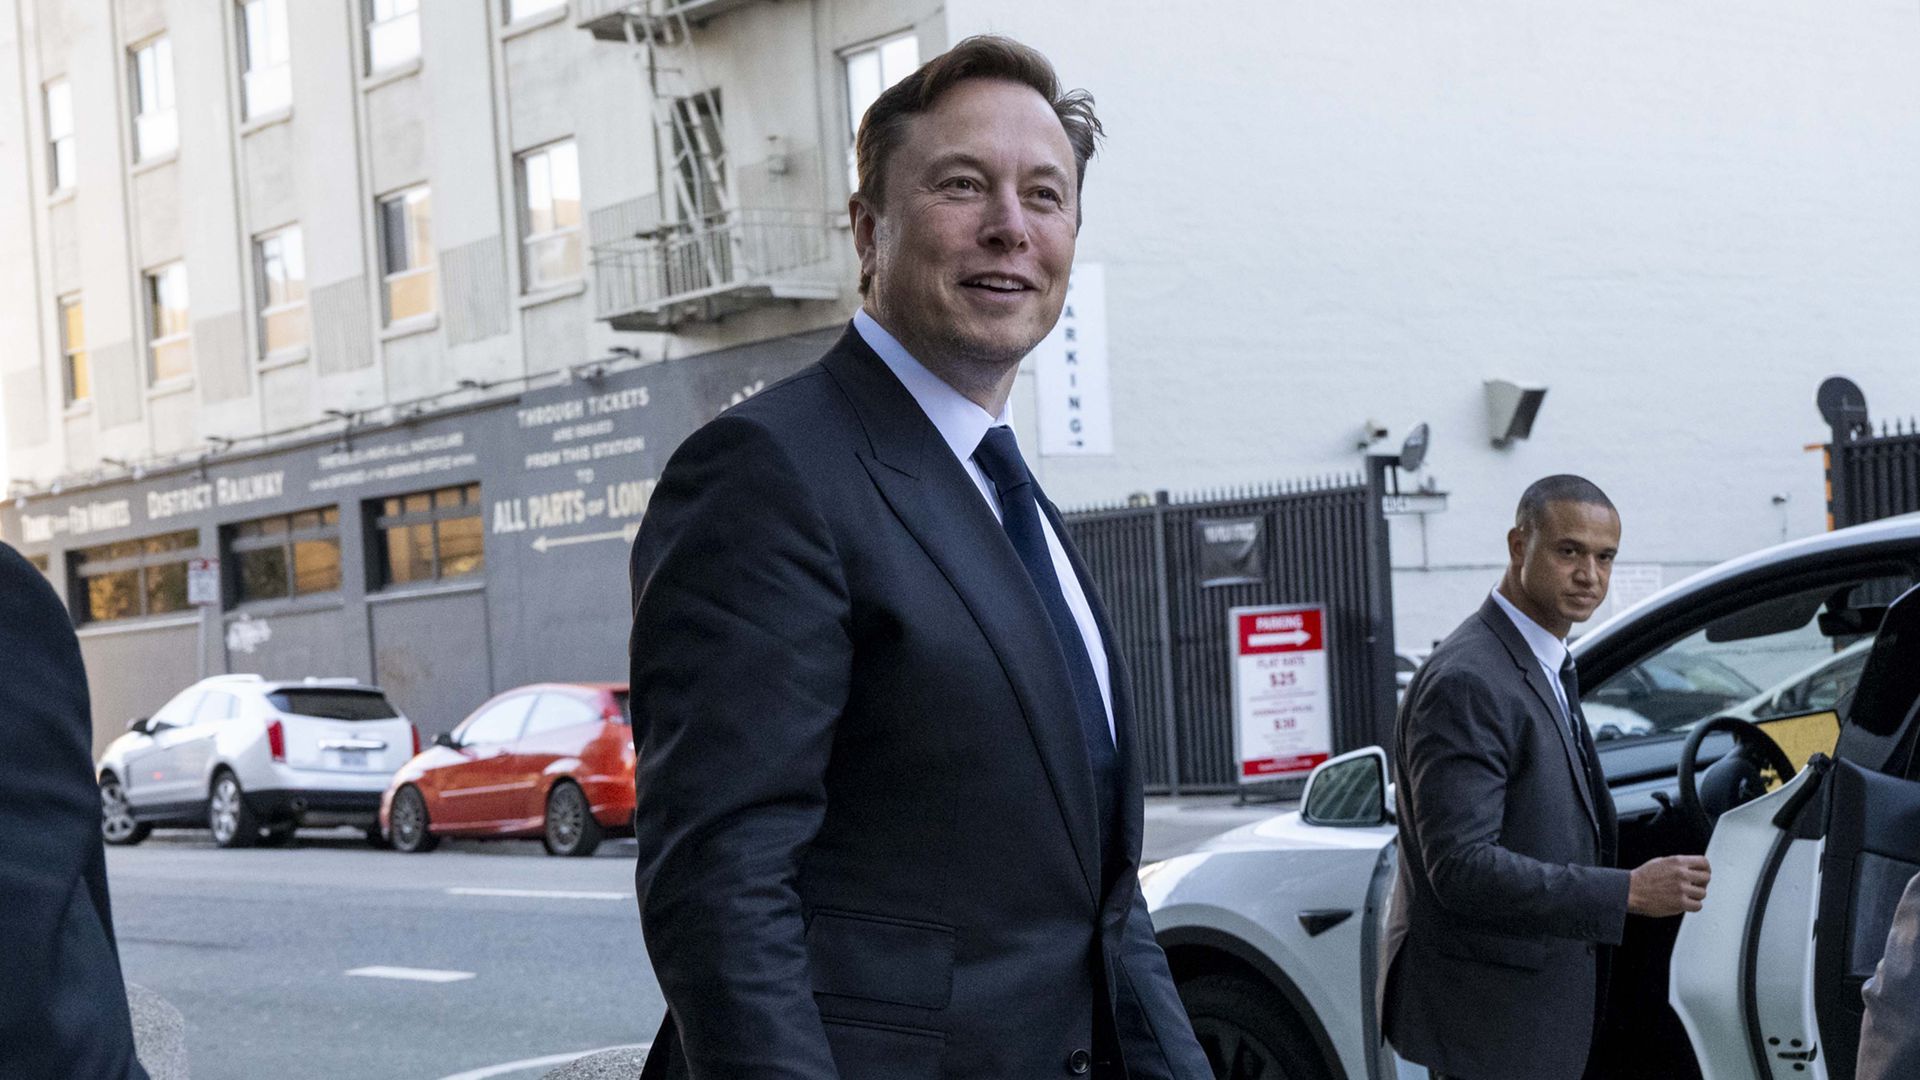 Tesla CEO Elon Musk departs court in San Francisco on Tuesday. Photo: Marlena Sloss/Bloomberg via Getty Images